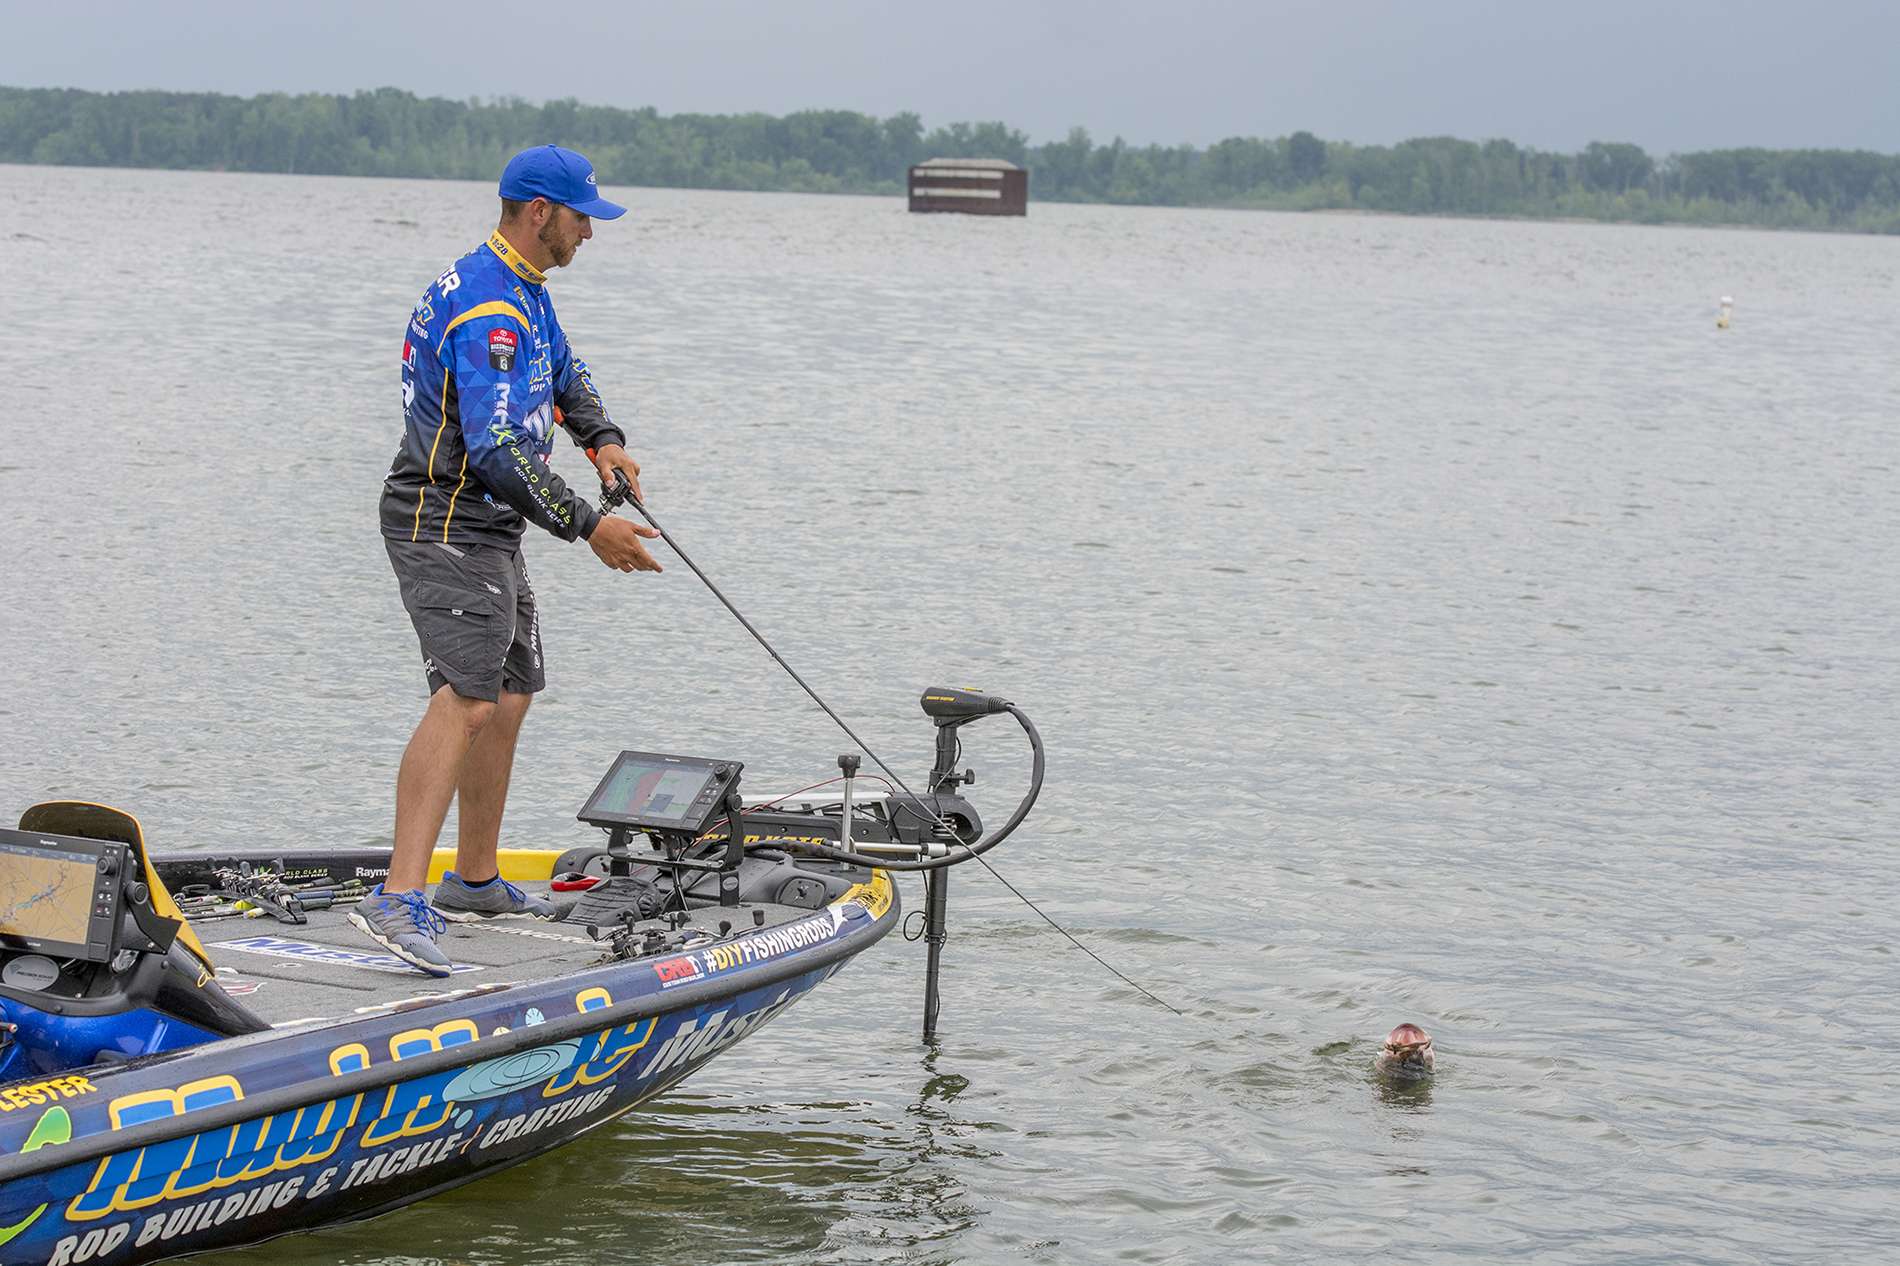 <p><b>What is a favorite thought or mindset that keeps you going whenever the season starts to drag or the days on the lake get tough? </p></b>
I try to always keep a positive attitude no matter what the circumstances may be. The Sabine River in Texas this season was a prime example. It is a super-tough fishery. And even though we fish on the Elite Series, I feel like 20 to 30 percent of the guys were defeated before they even made their first cast. Before you let the negative thoughts start running through your mind you need to remember that 50 anglers are still getting paid and one angler will hold up the blue trophy at the end of the week so it might as well be you. You also have to remind yourself that everyone is on the same playing field and they have to catch them too.
